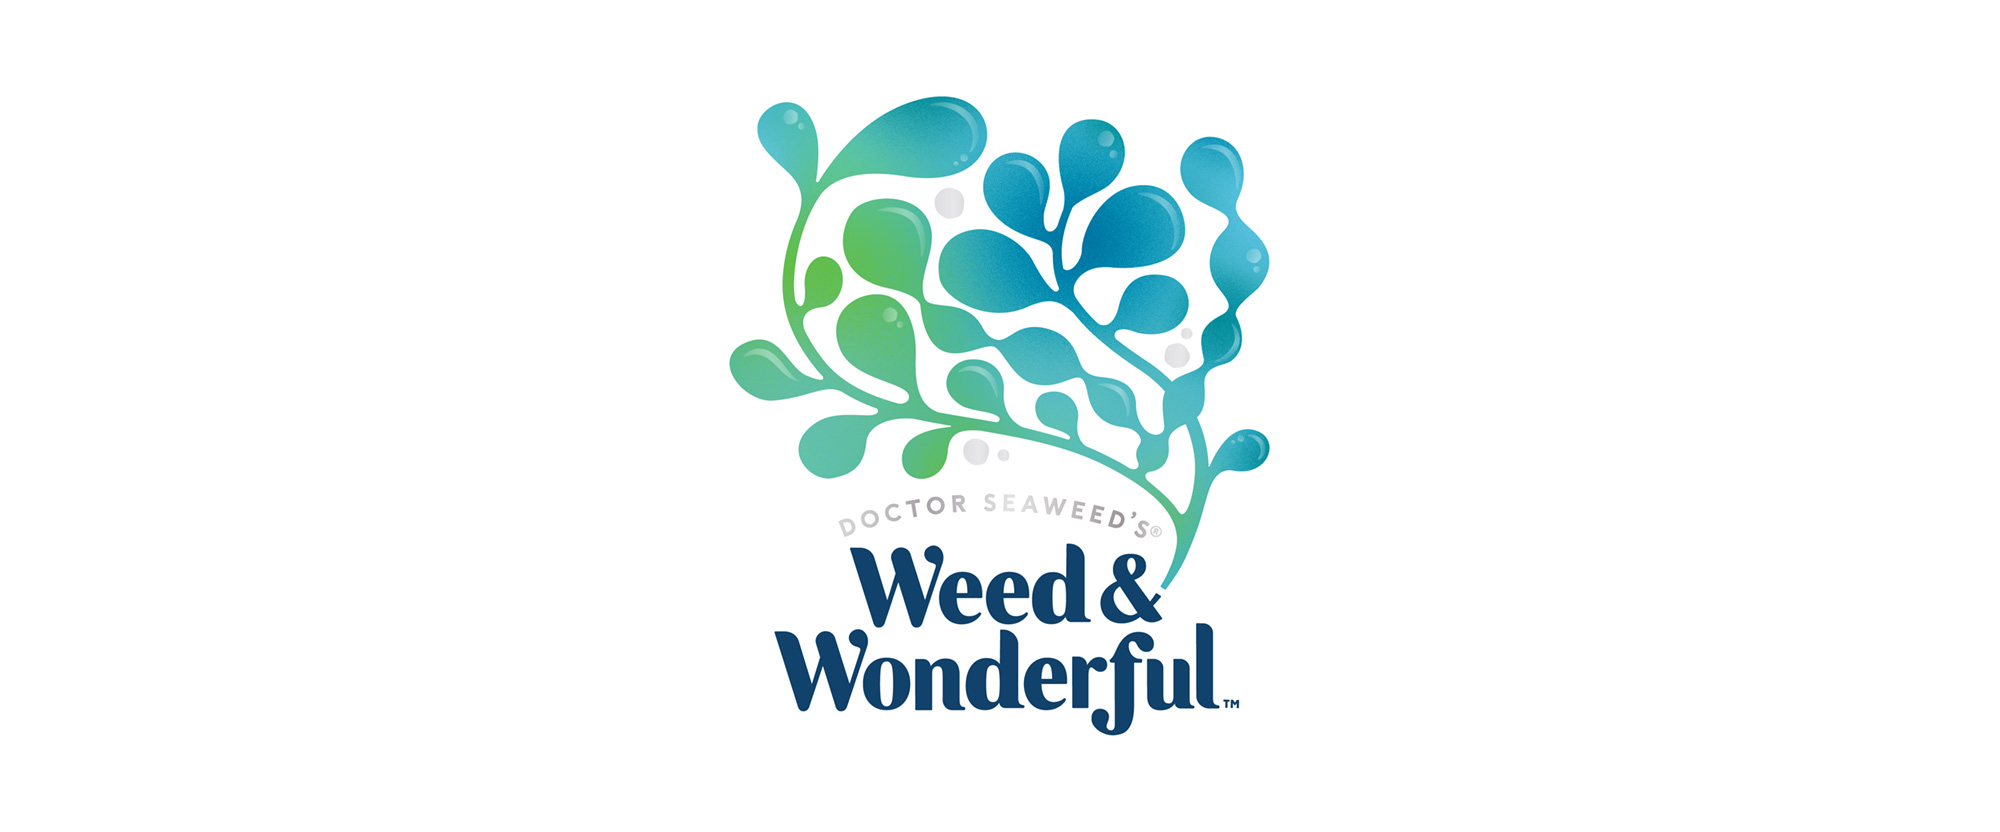 New Logo and Packaging for Weed & Wonderful by Family (and friends)